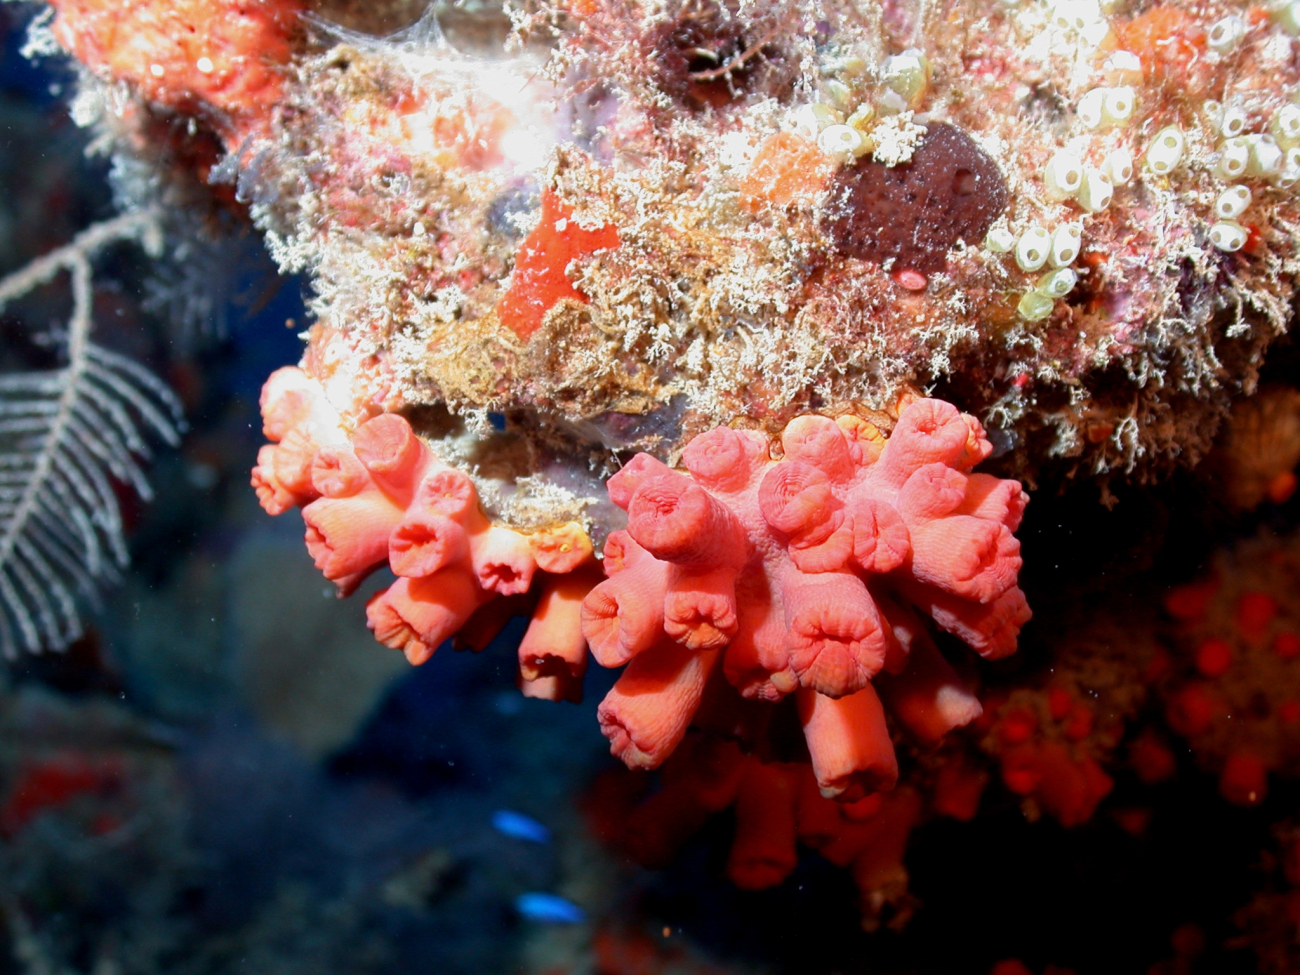 Orange cup corals with tunicates at top right